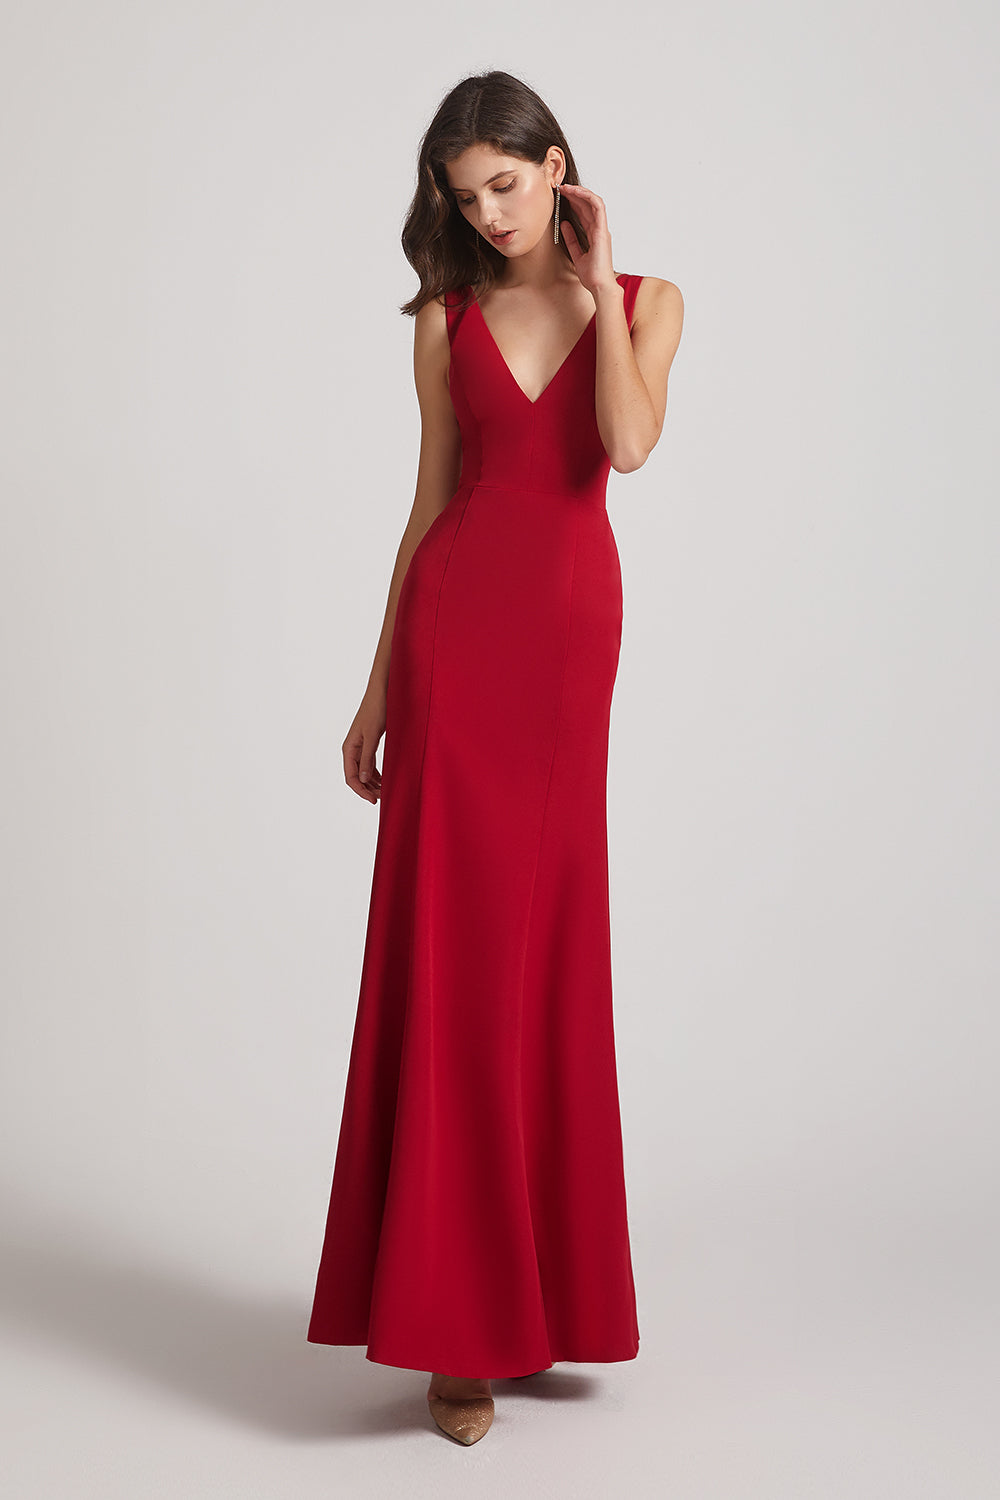 fit and flare bridesmaid dress